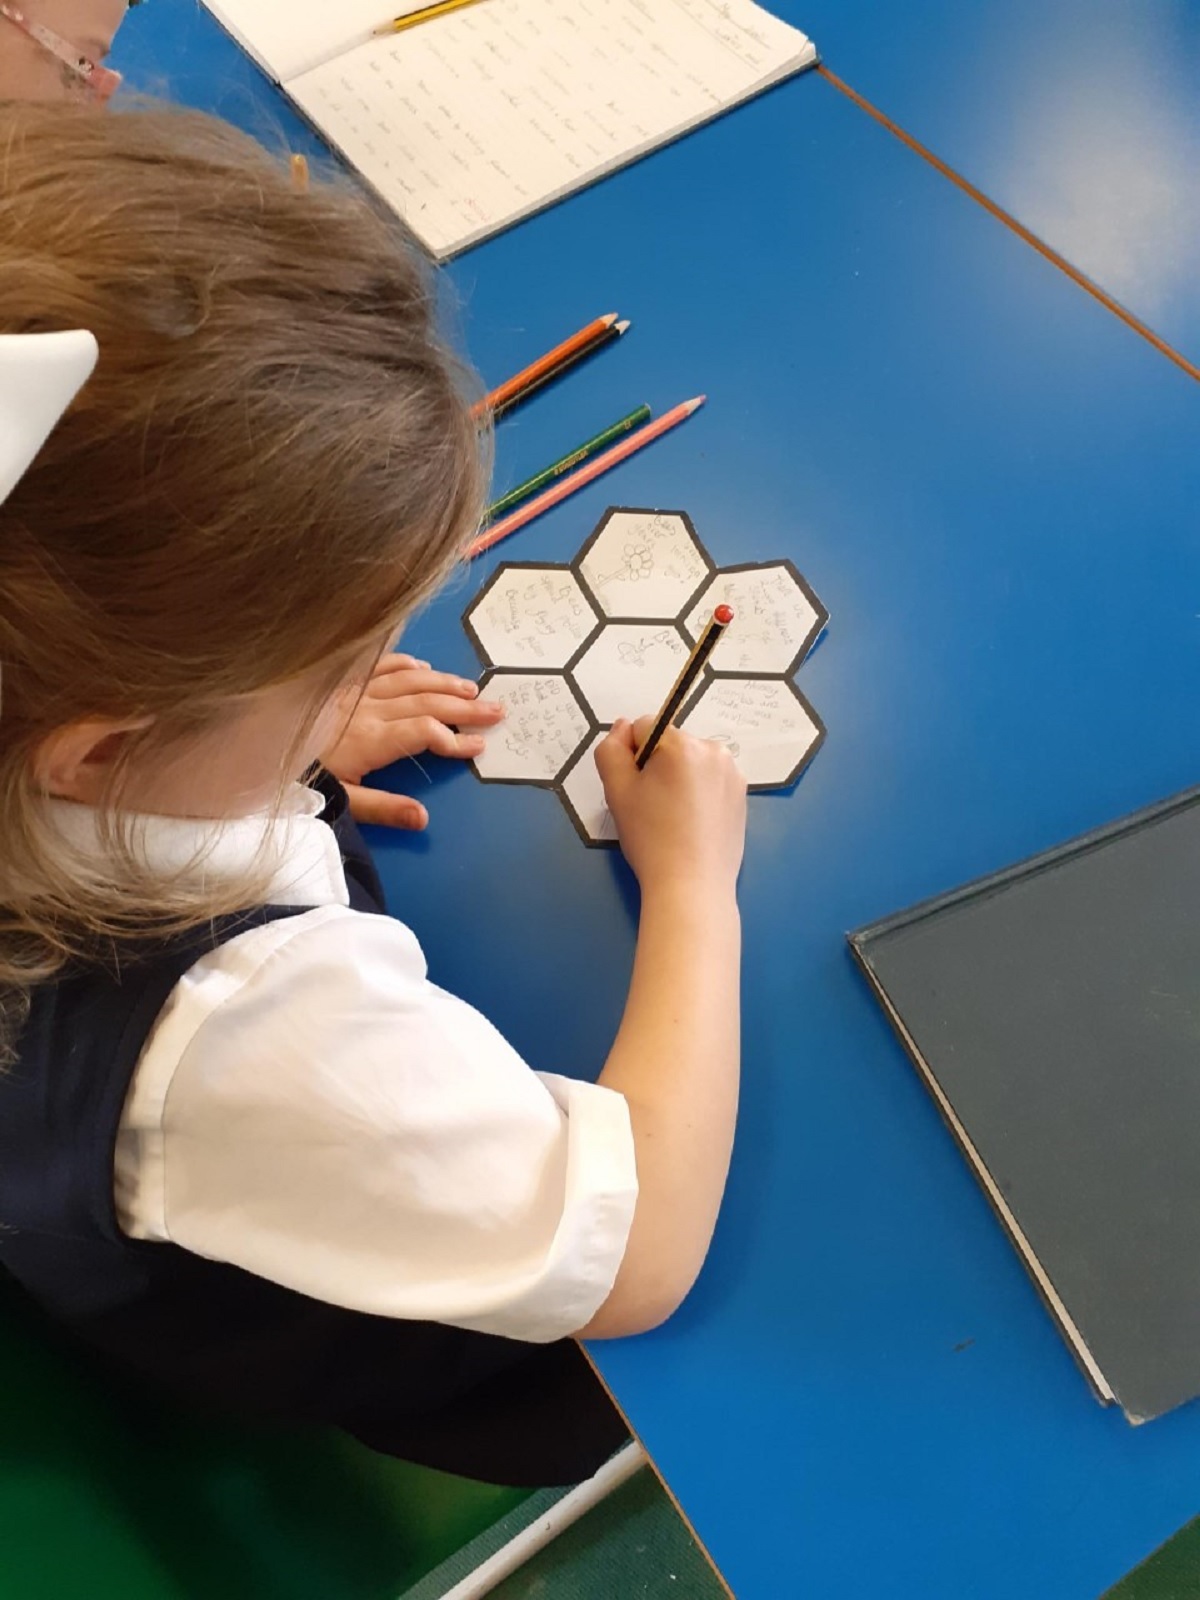 Spreading her wings - Georgina Smith, in Year 3, writes up facts about bees